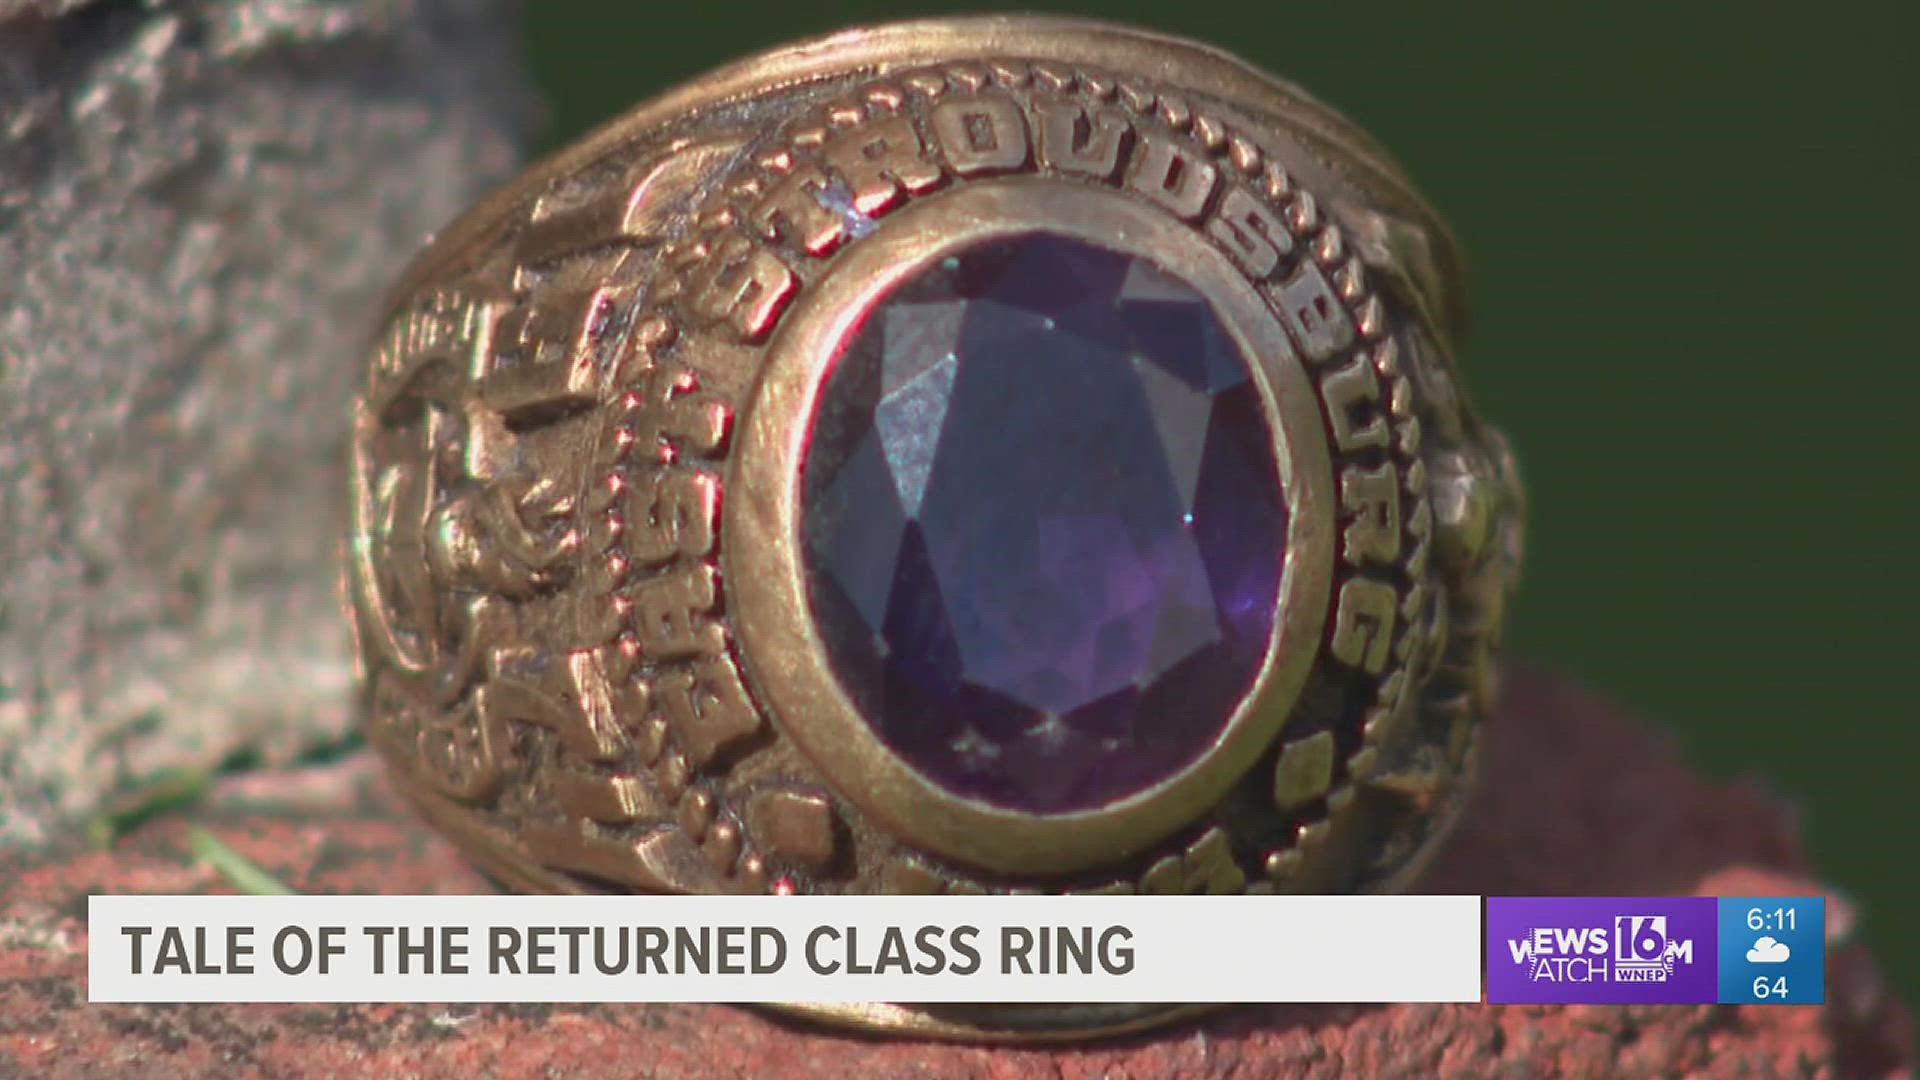 The tale of the turned-up ring from last Friday has become the tale of the returned ring after its owner was located.